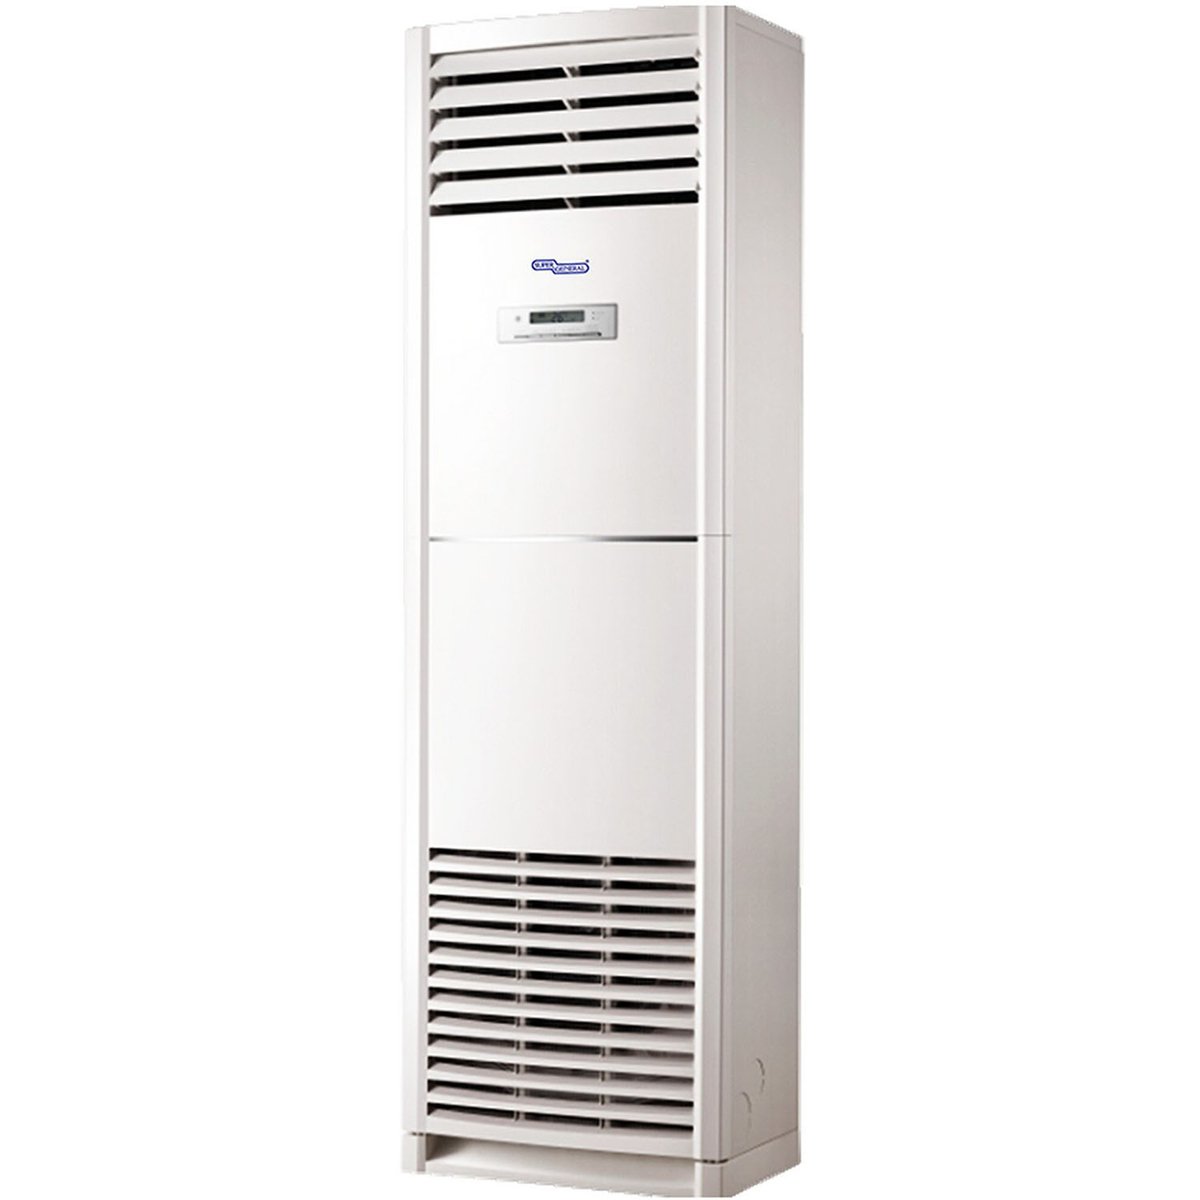 Super General Floor Standing Air Conditioner SGFS36HE 3Ton